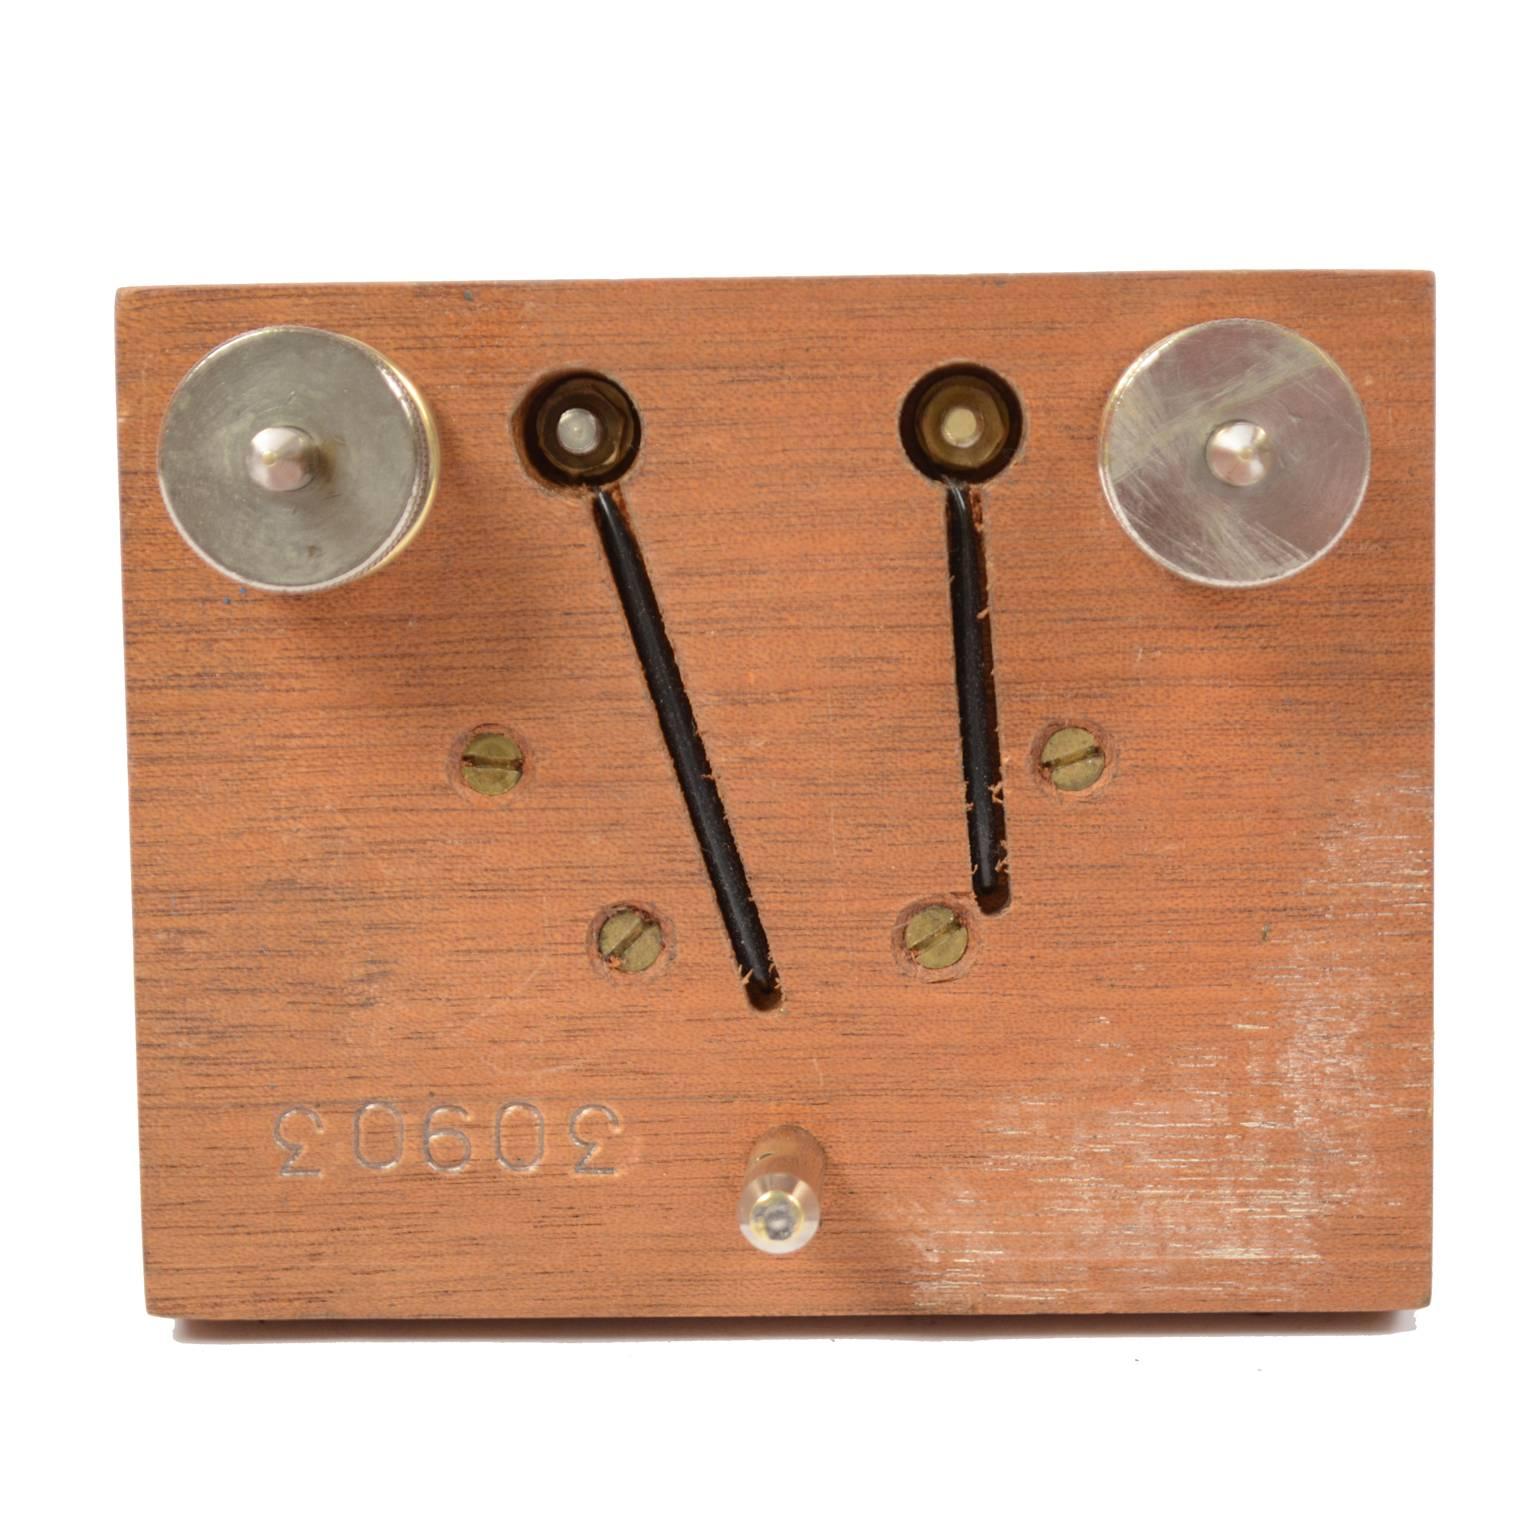 Galvanometer Antique Measuring Instrument Used for Telegraph Cables 1850 circa For Sale 2